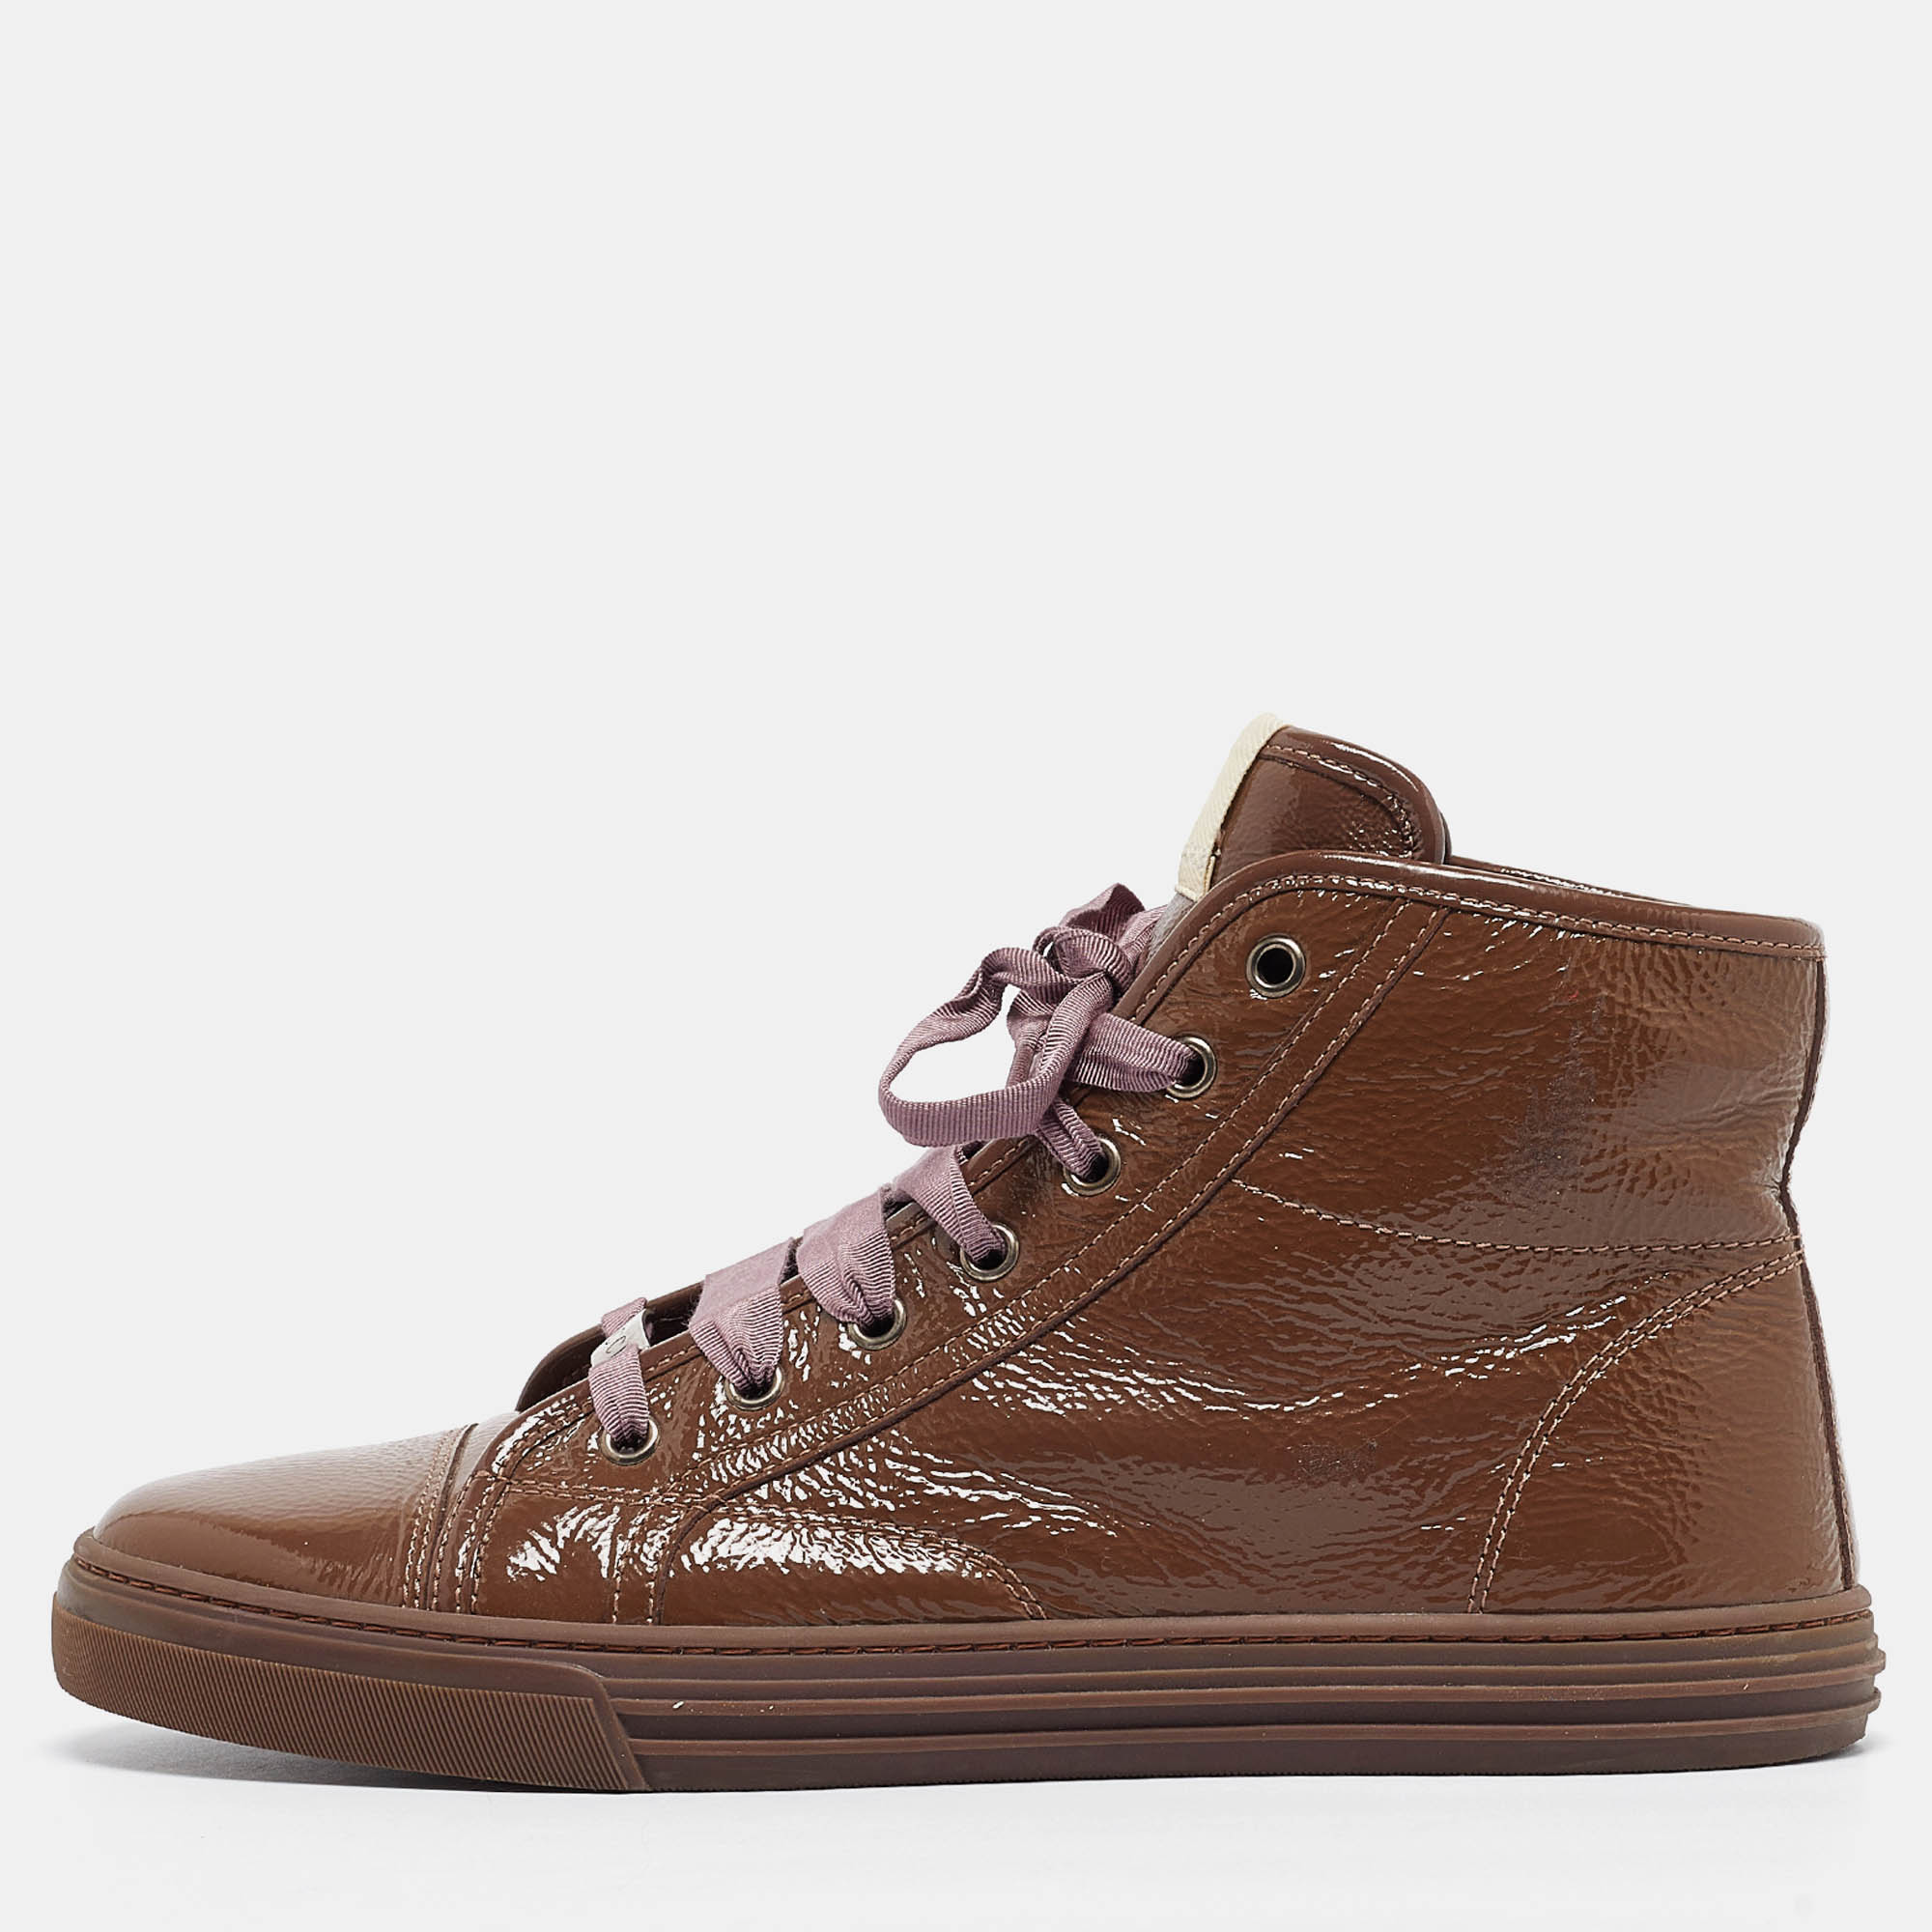 Gucci brown patent gg high top sneakers size 40